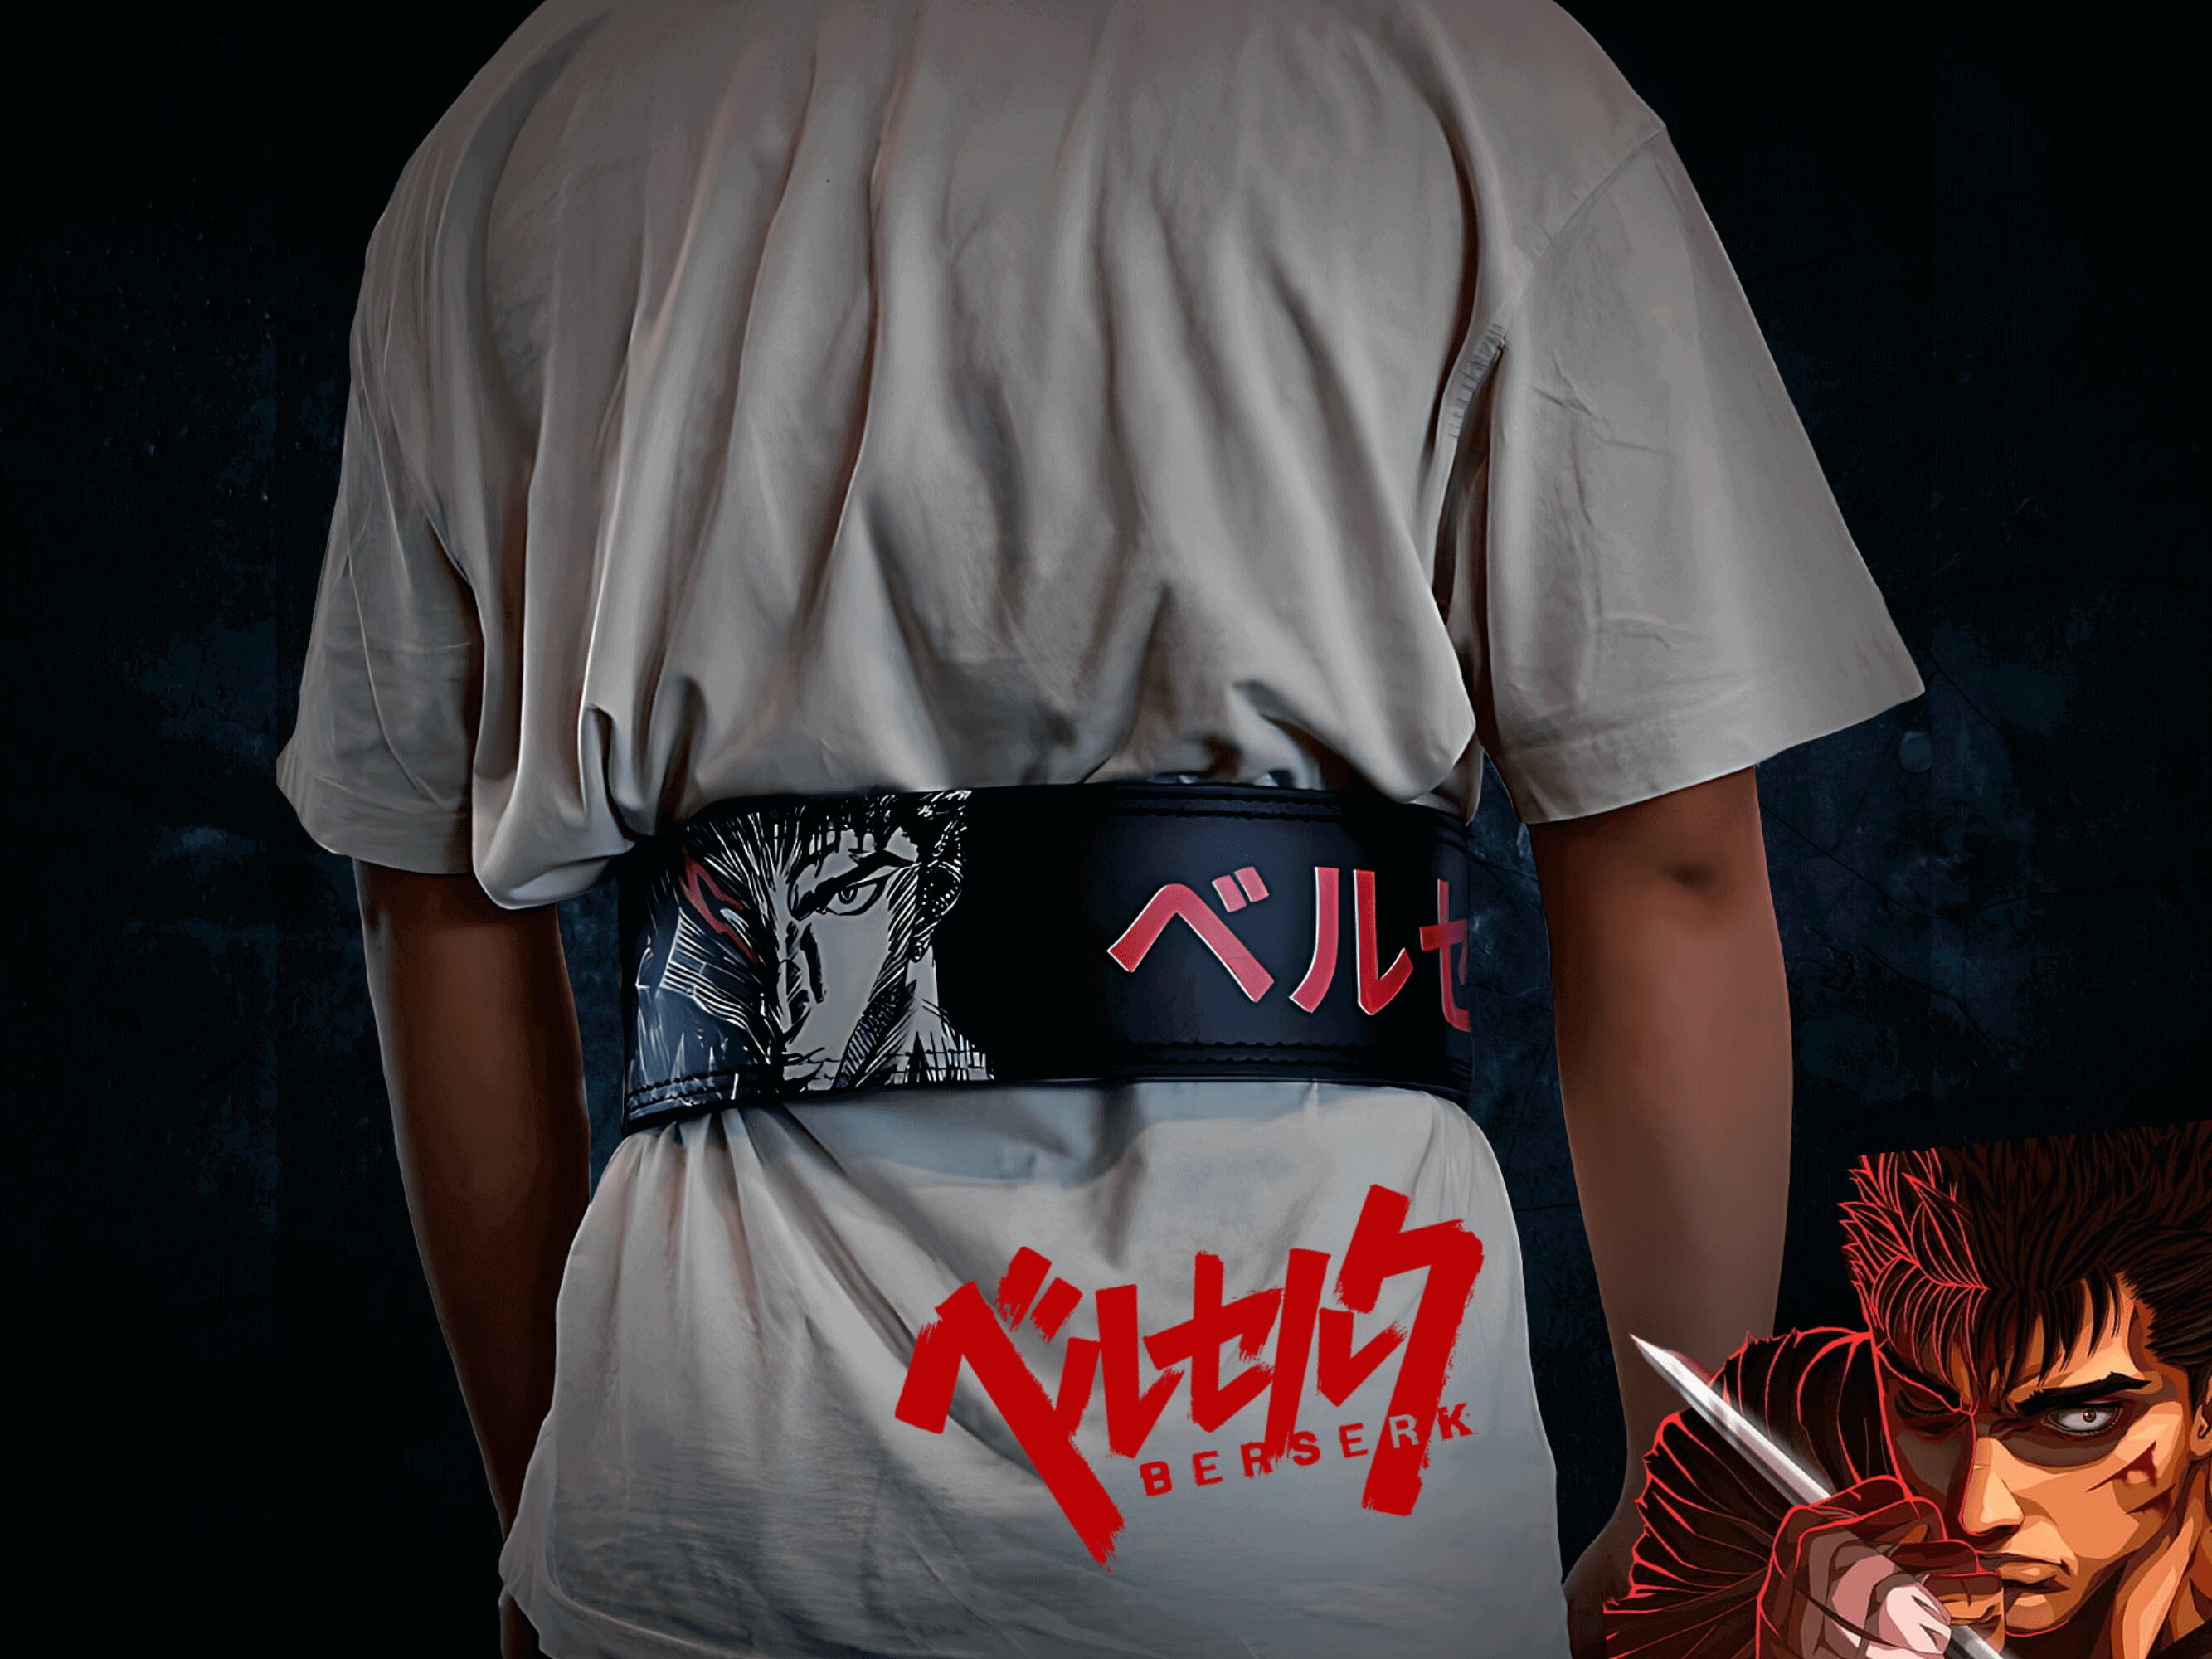 Go to war with our Berserk lifting belts they just restocked  TikTok